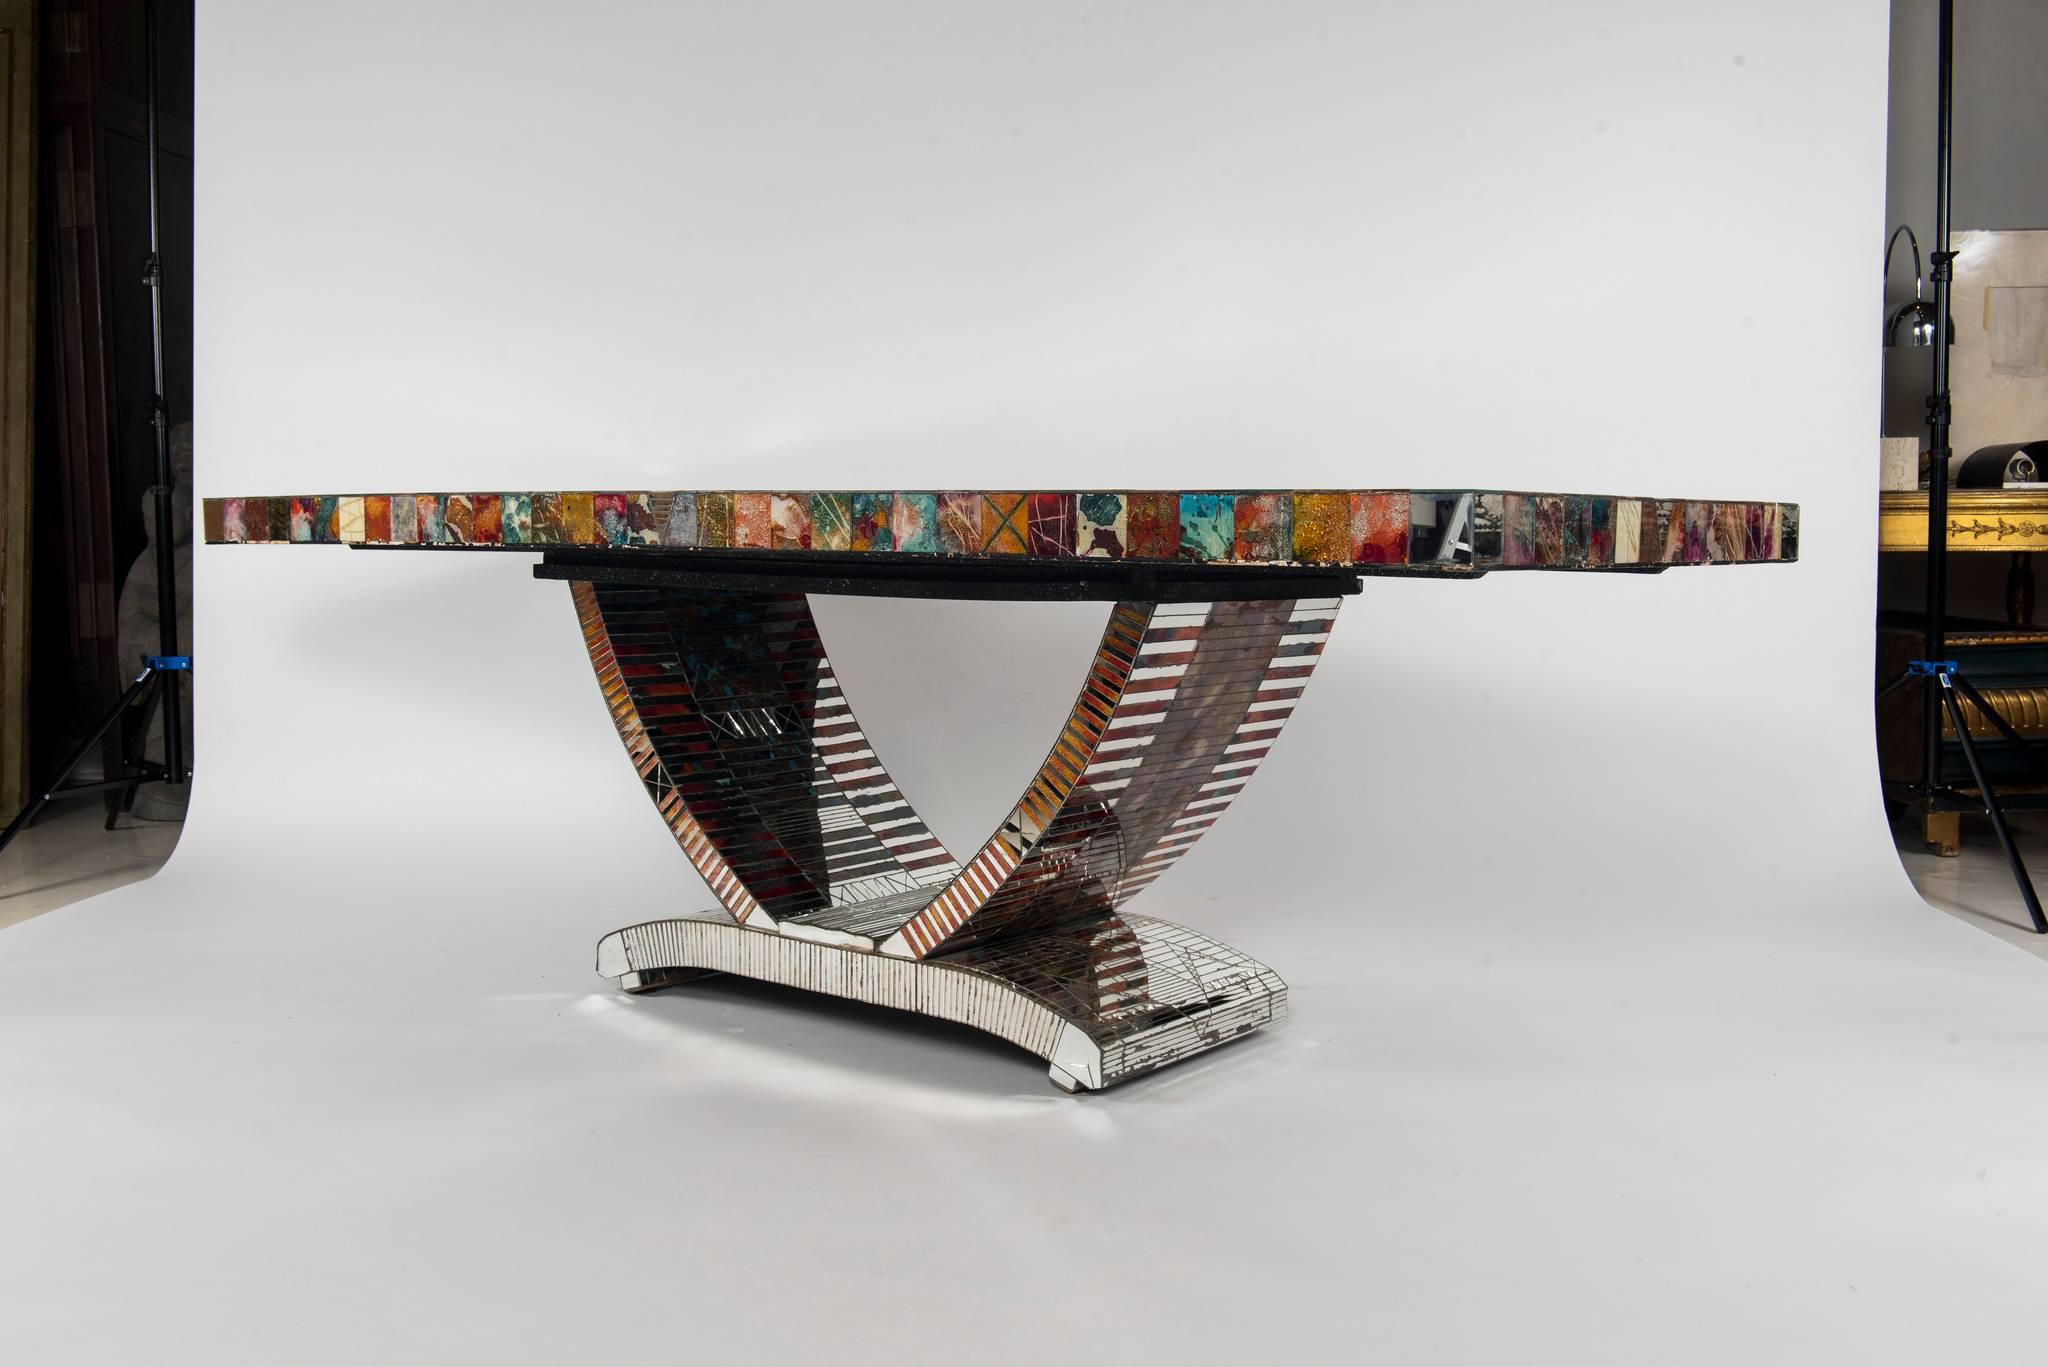 20th Century French Art Deco Style Mosaic Mirror Table by Daniel Clément